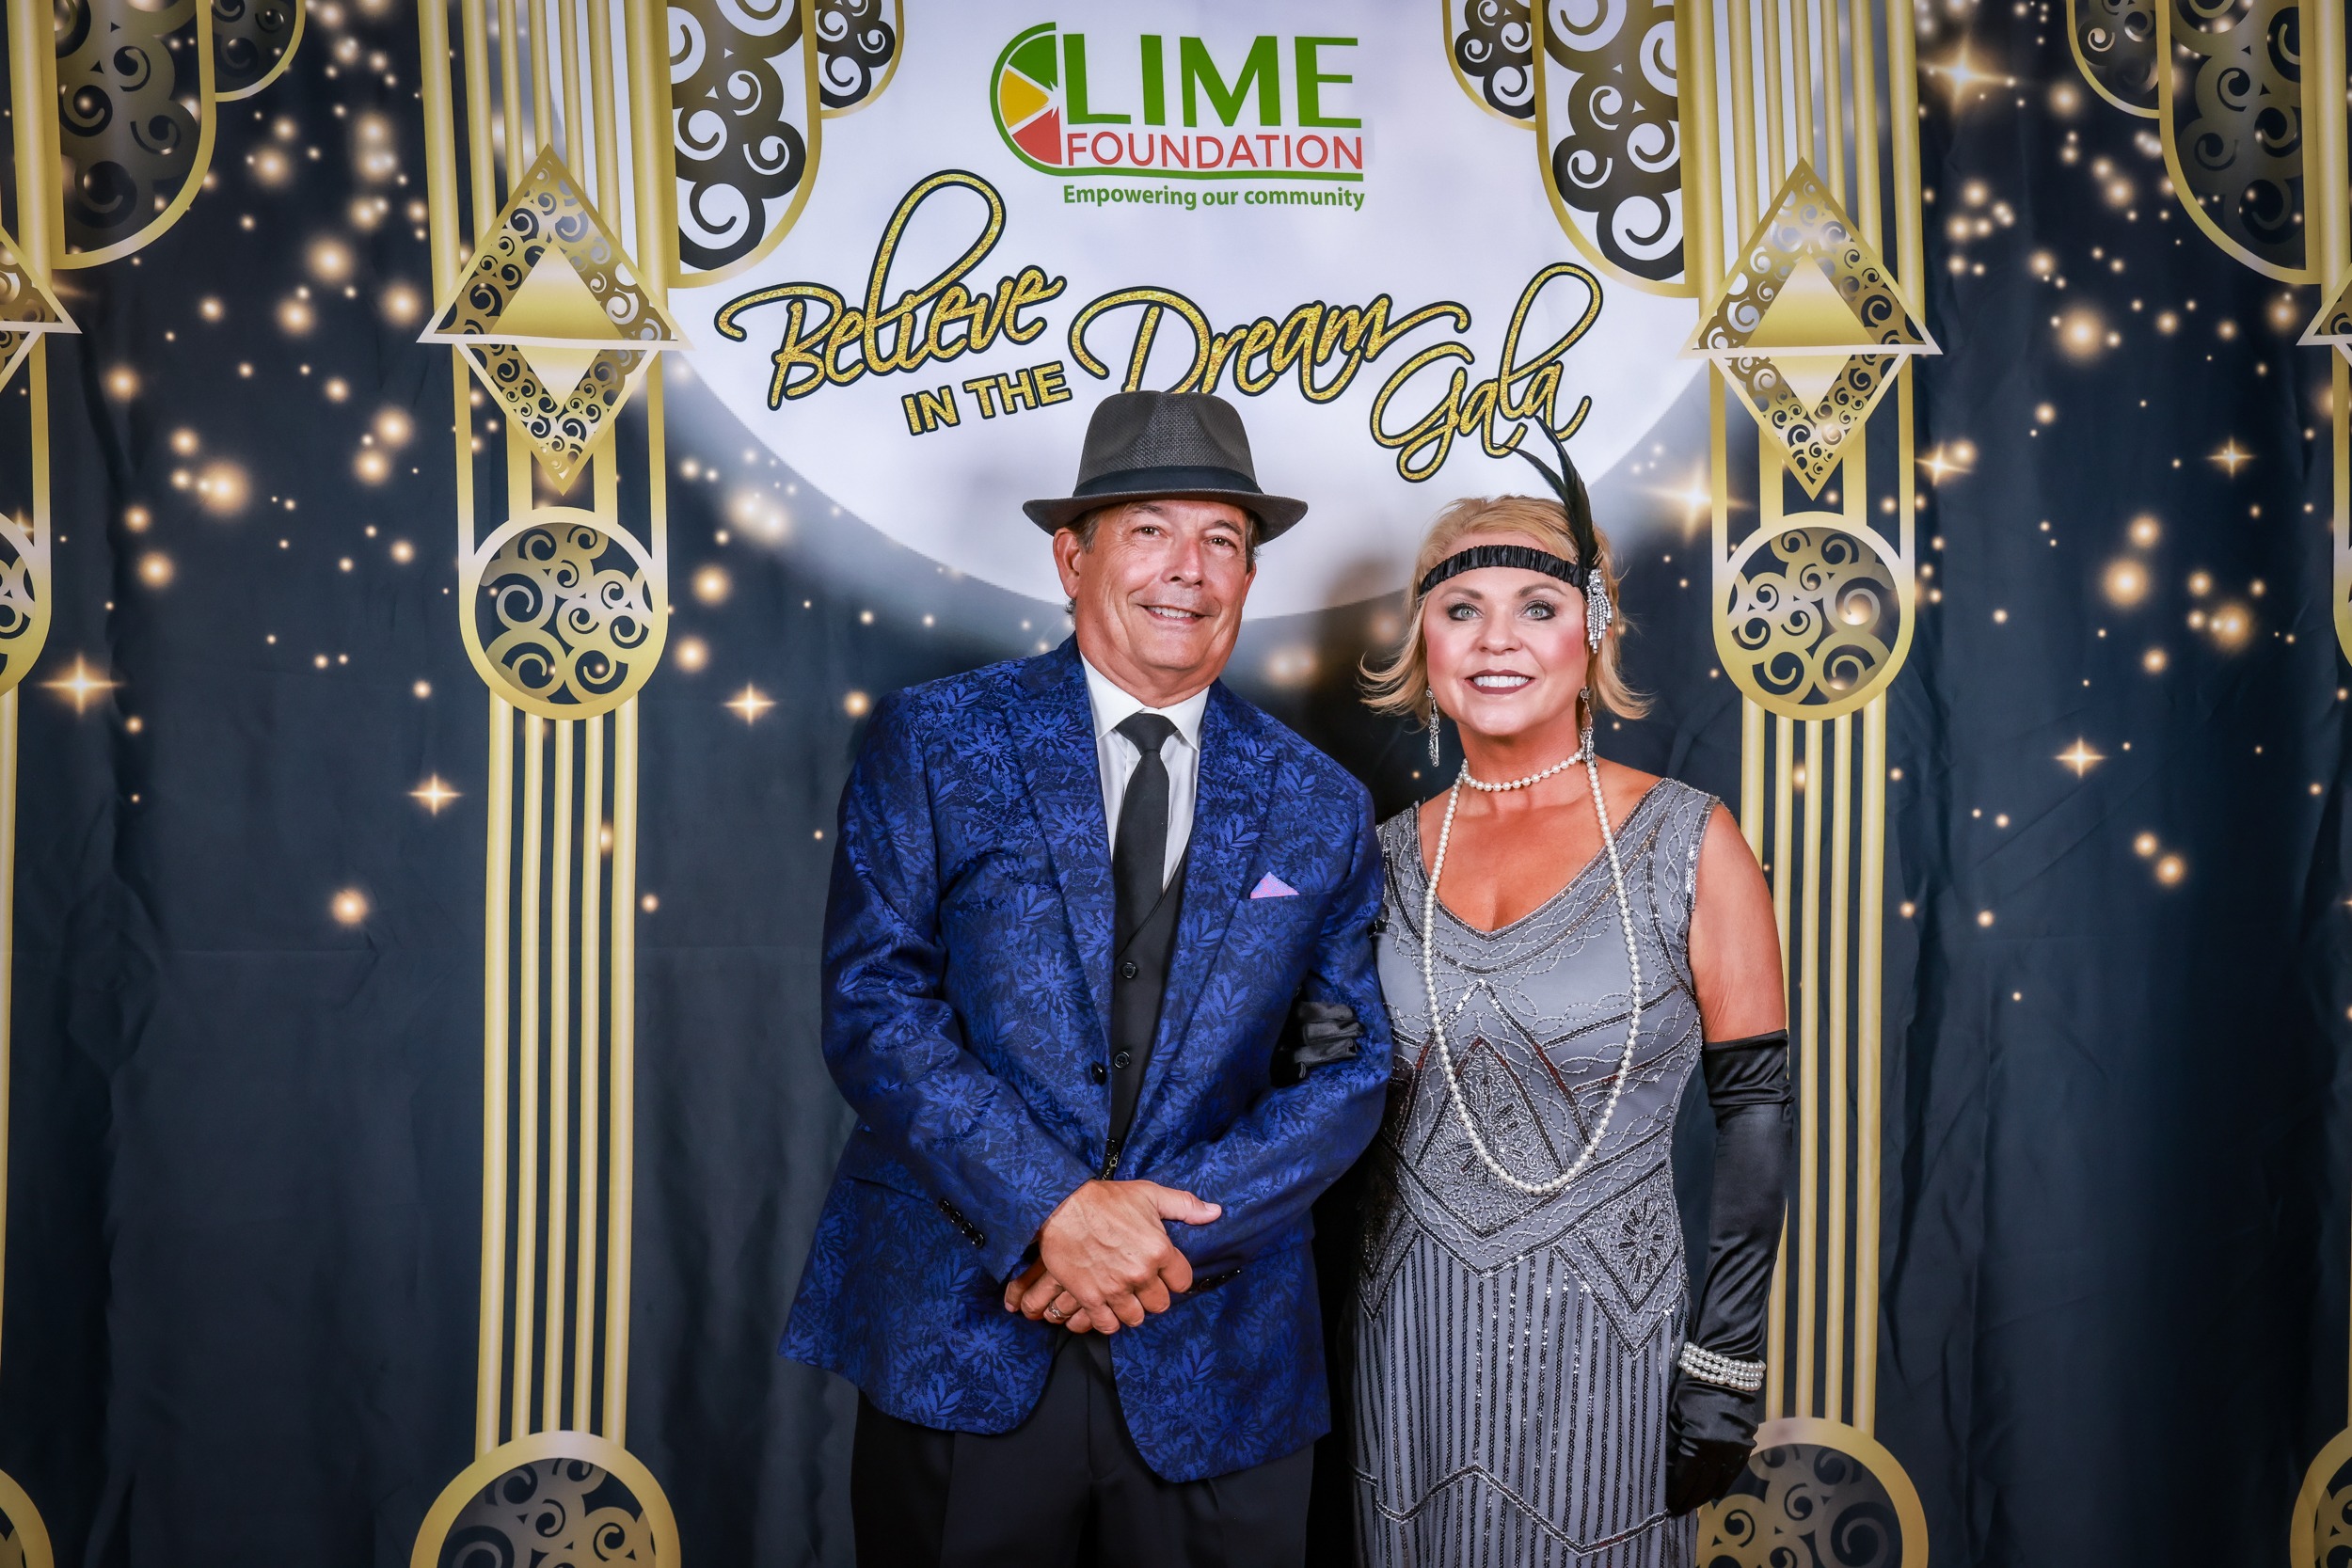 A man and woman pose for a photo at a Gatsby themed party hosted by The LIME Foundation of Santa Rosa.